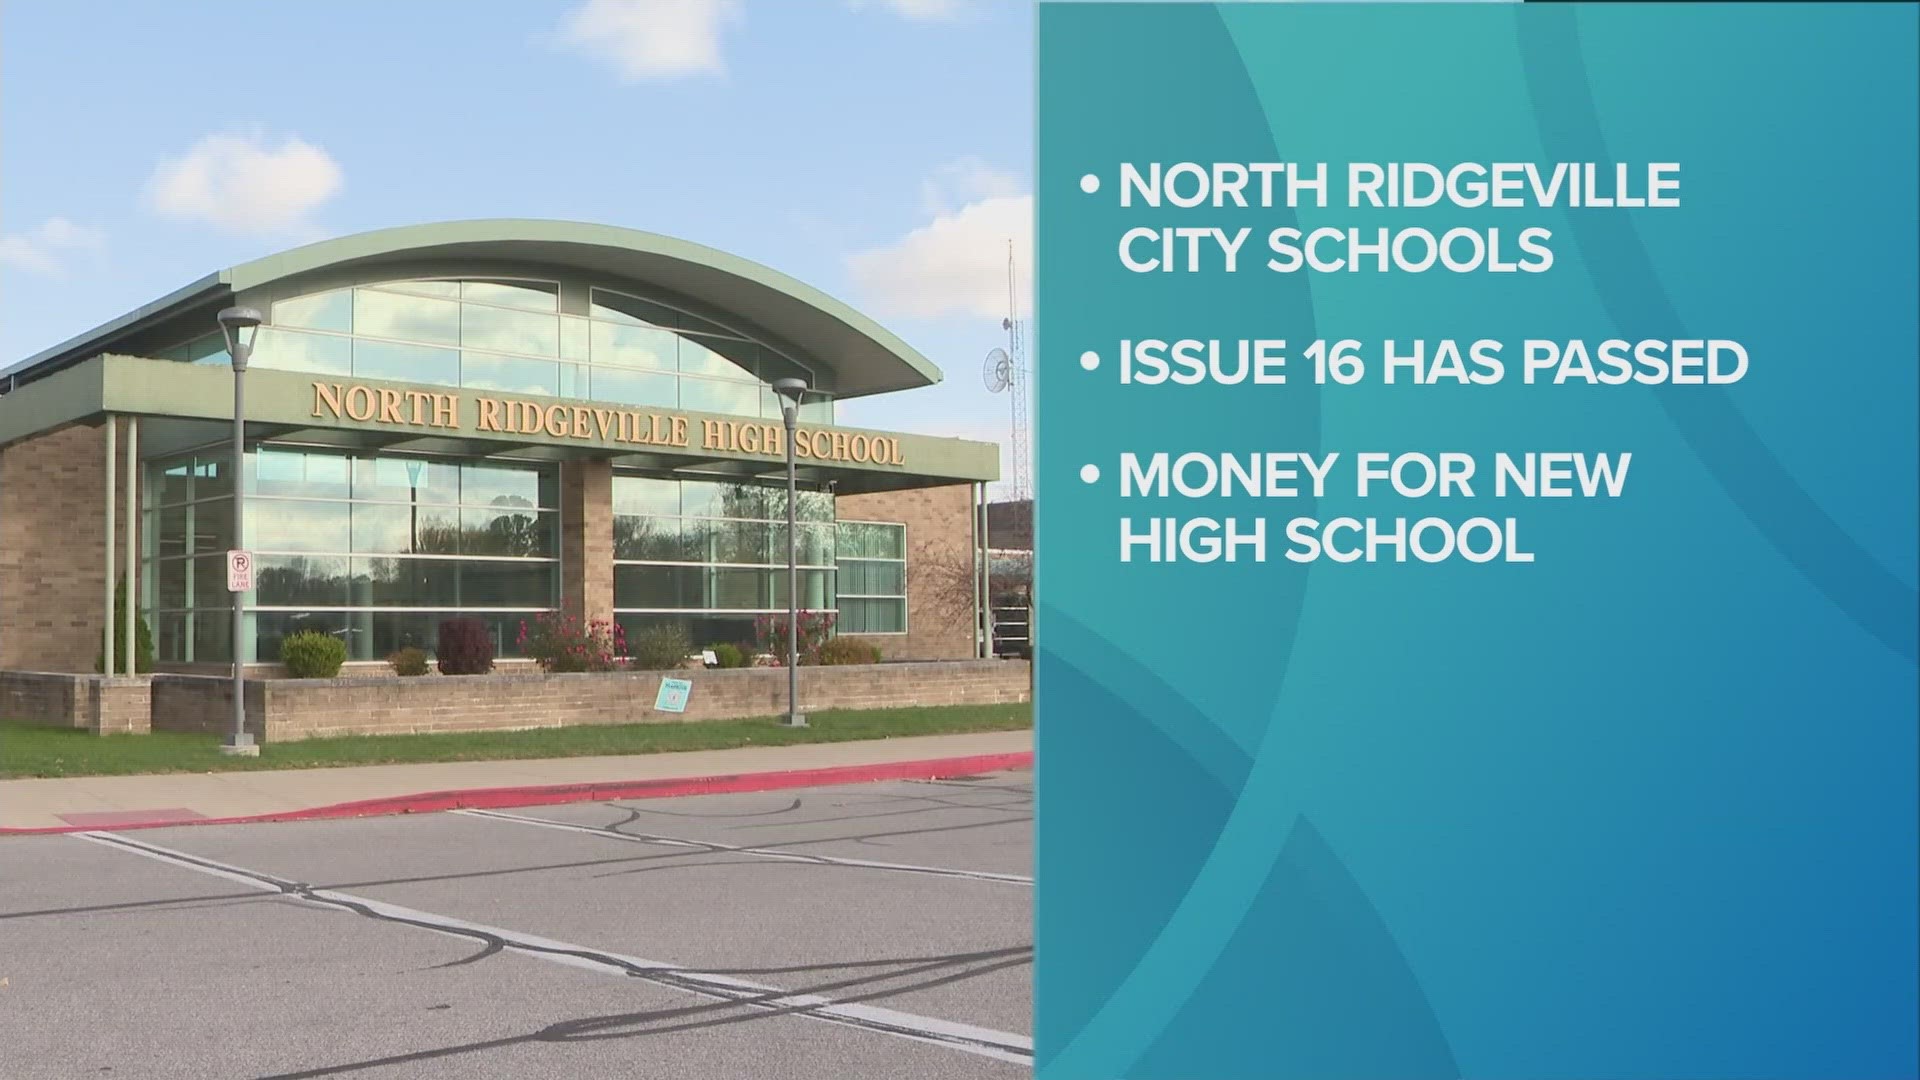 Notably, North Ridgeville voters approved Issue 16, which will raise $143 million for the construction of a new high school. The measure passed by just 228 votes.